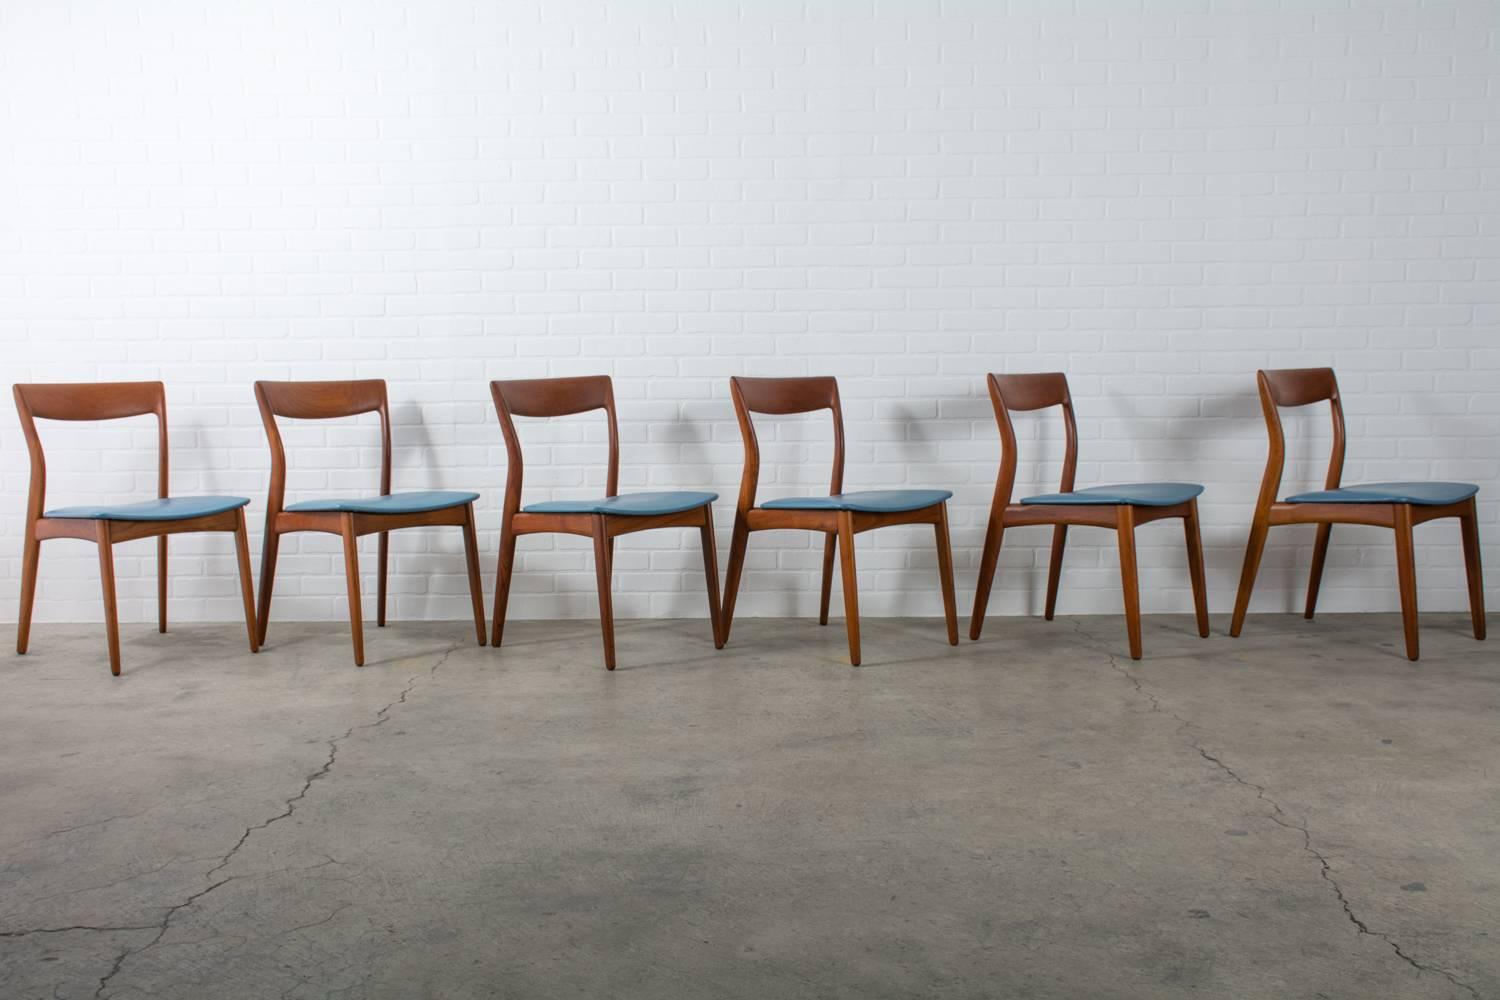 This is a set of six Danish Modern teak dining chairs designed by R. Borrogaard for Viborg Stolefabrik, Denmark. Beautiful curved back rests and original blue faux leather seats. Teak dining table available separately.